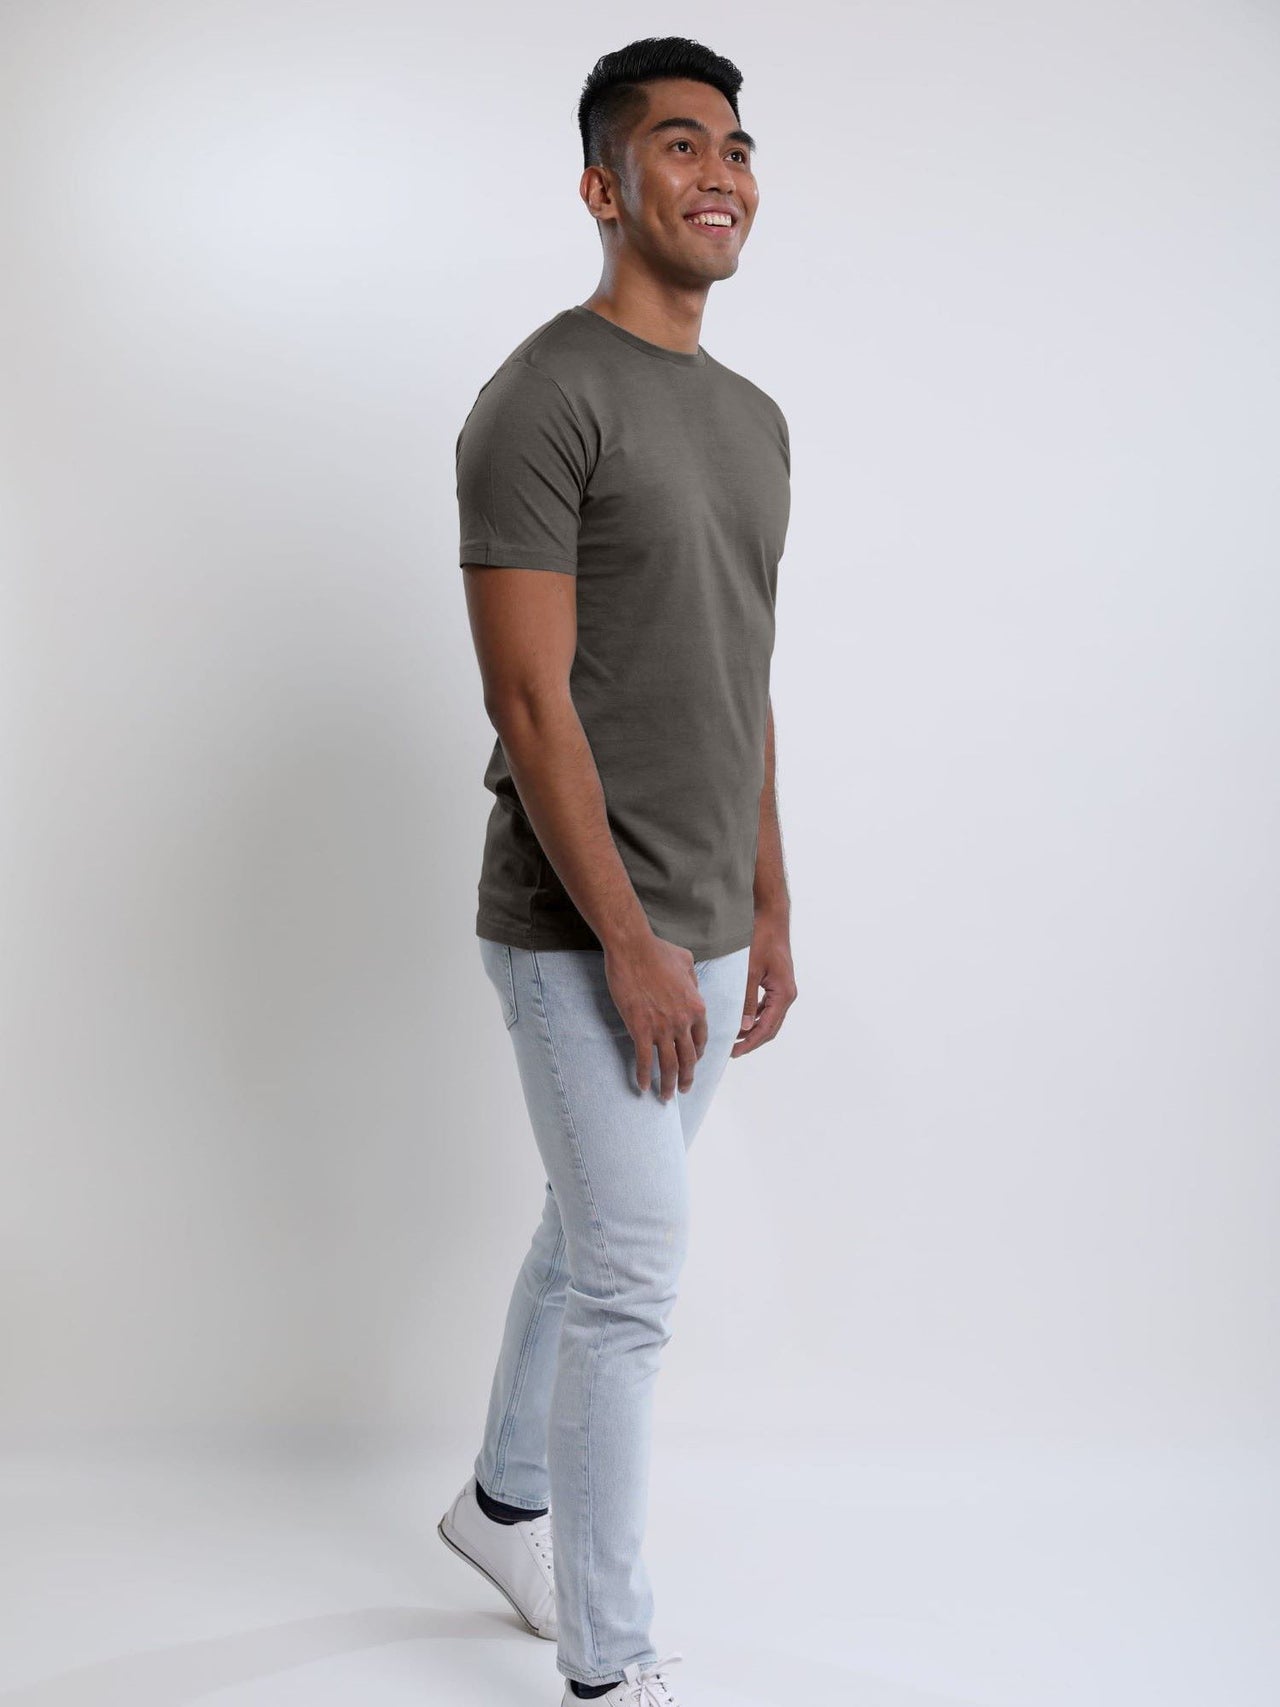 A head to toe shot of a tall slim guy wearing a dark grey medium tall t-shirt and smiling.